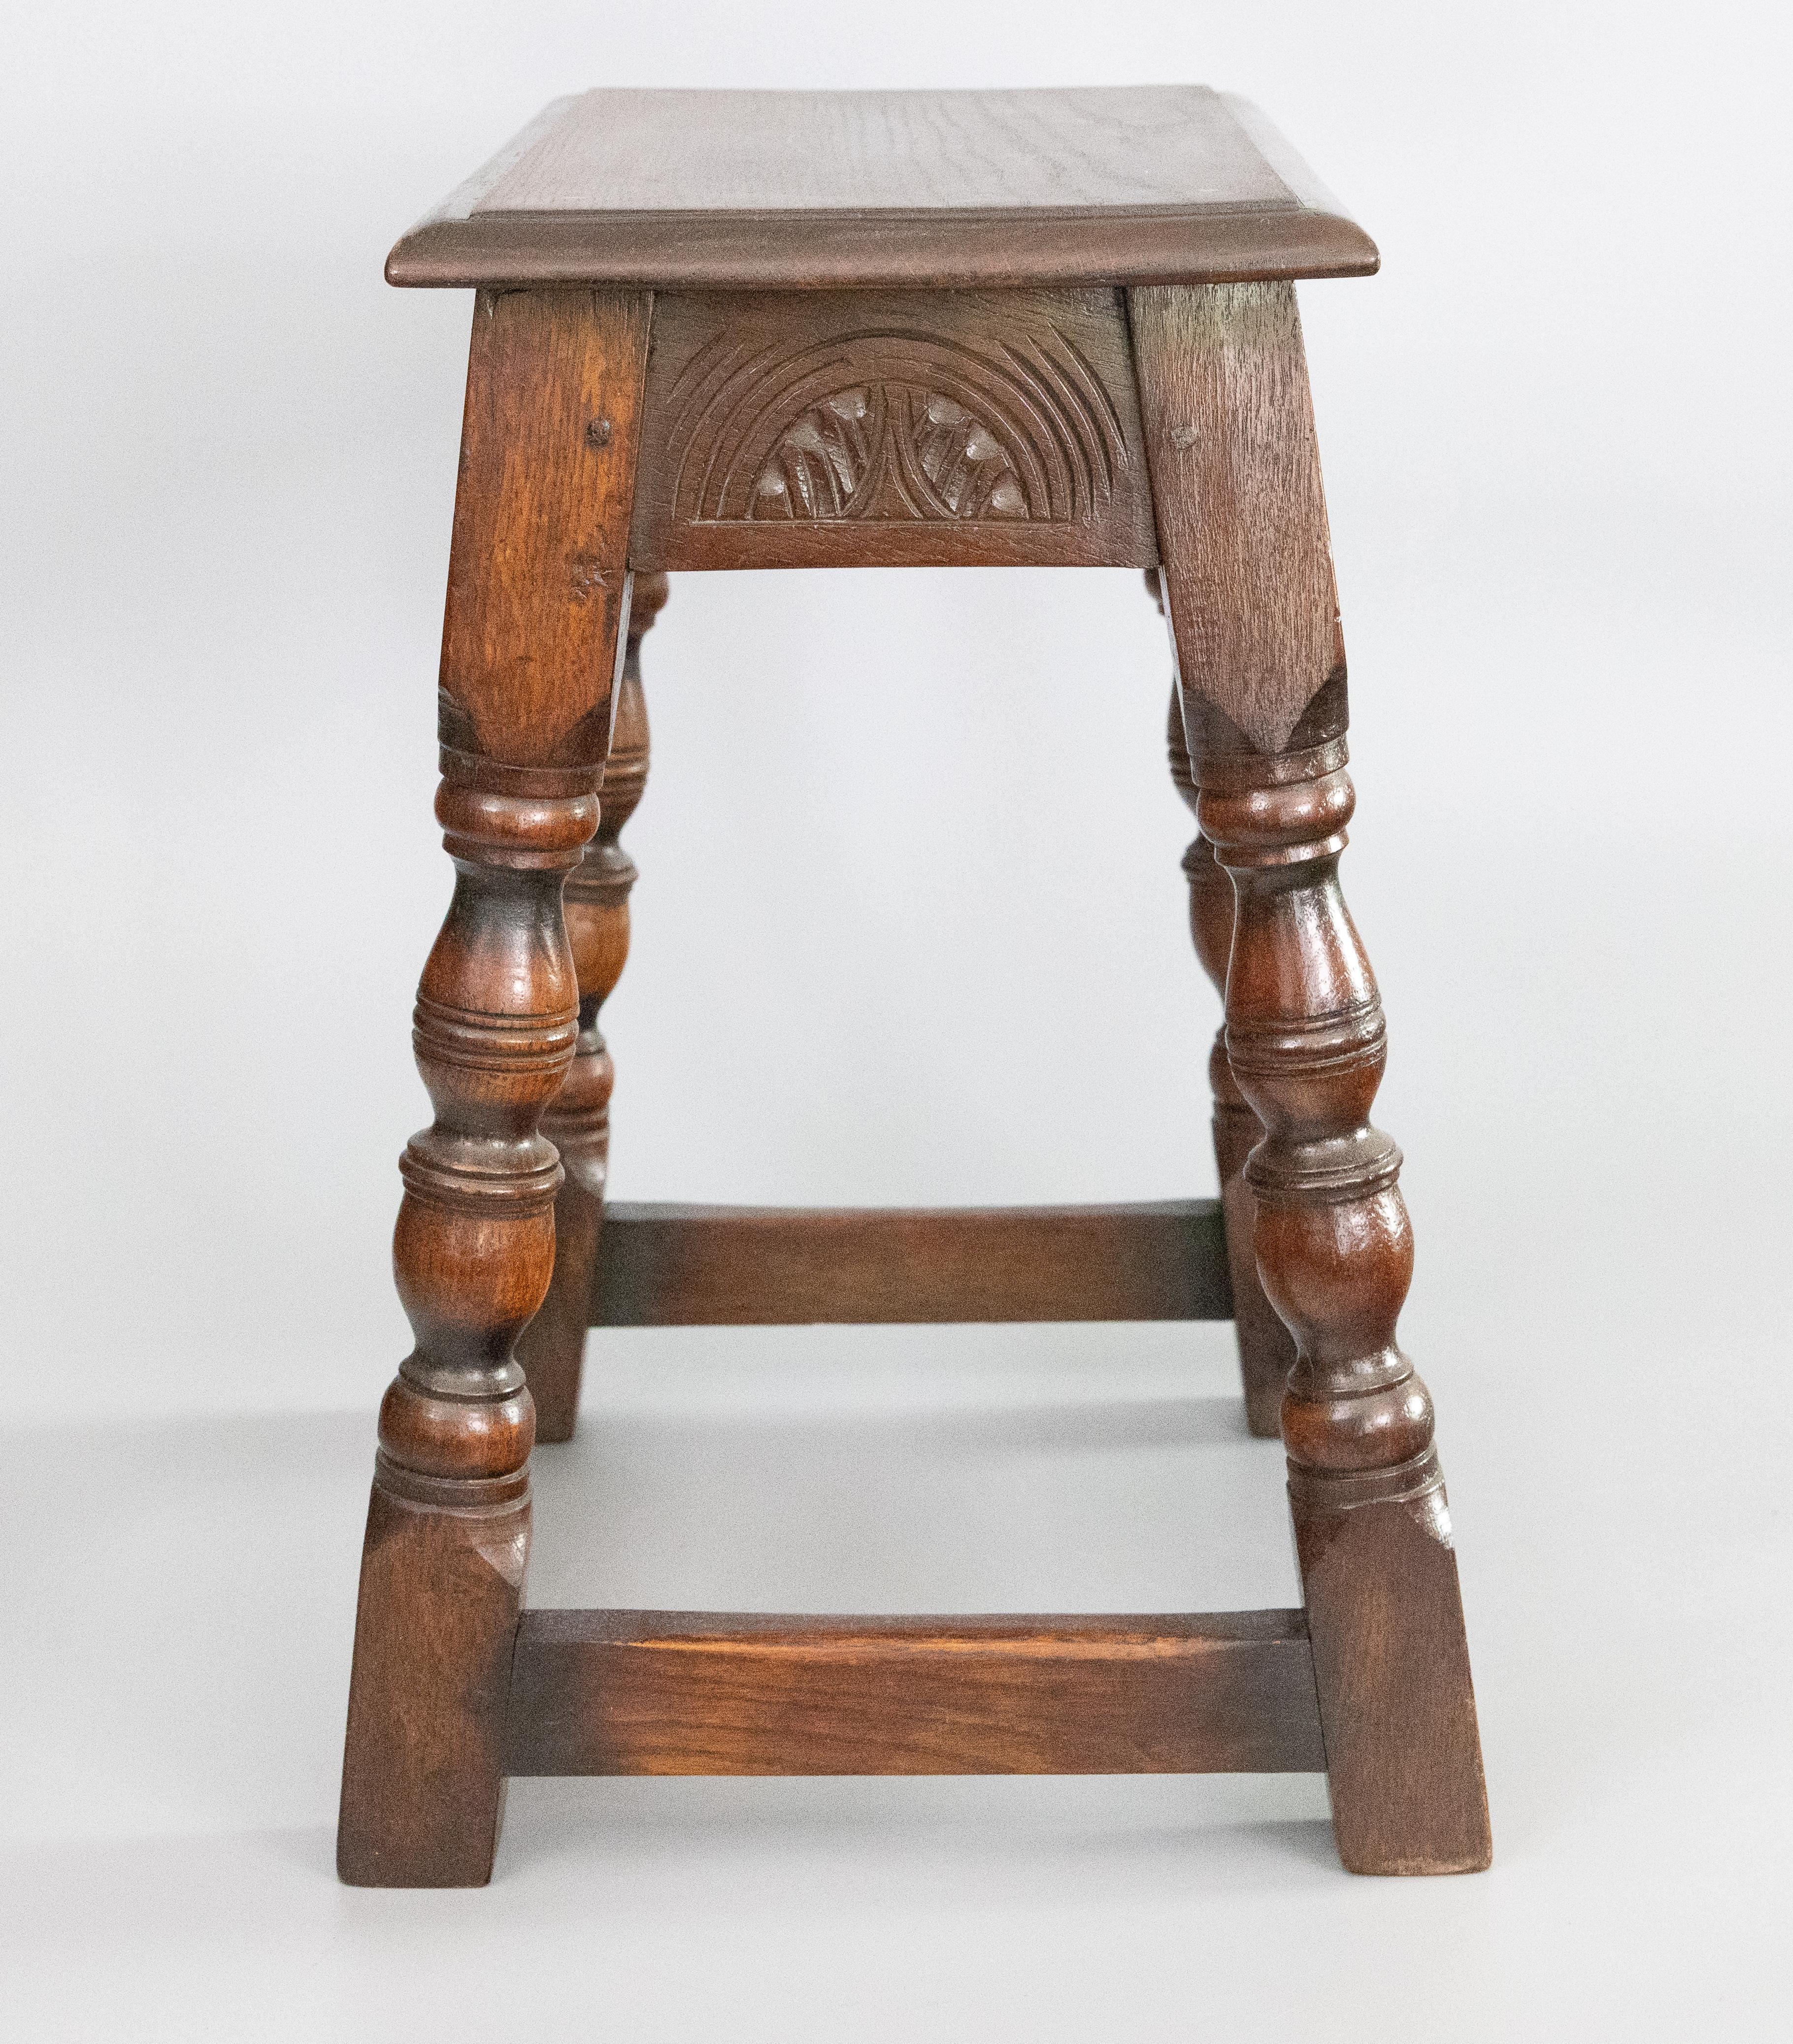 19th Century English Carved Oak Pegged Joint Stool Side Table For Sale 1